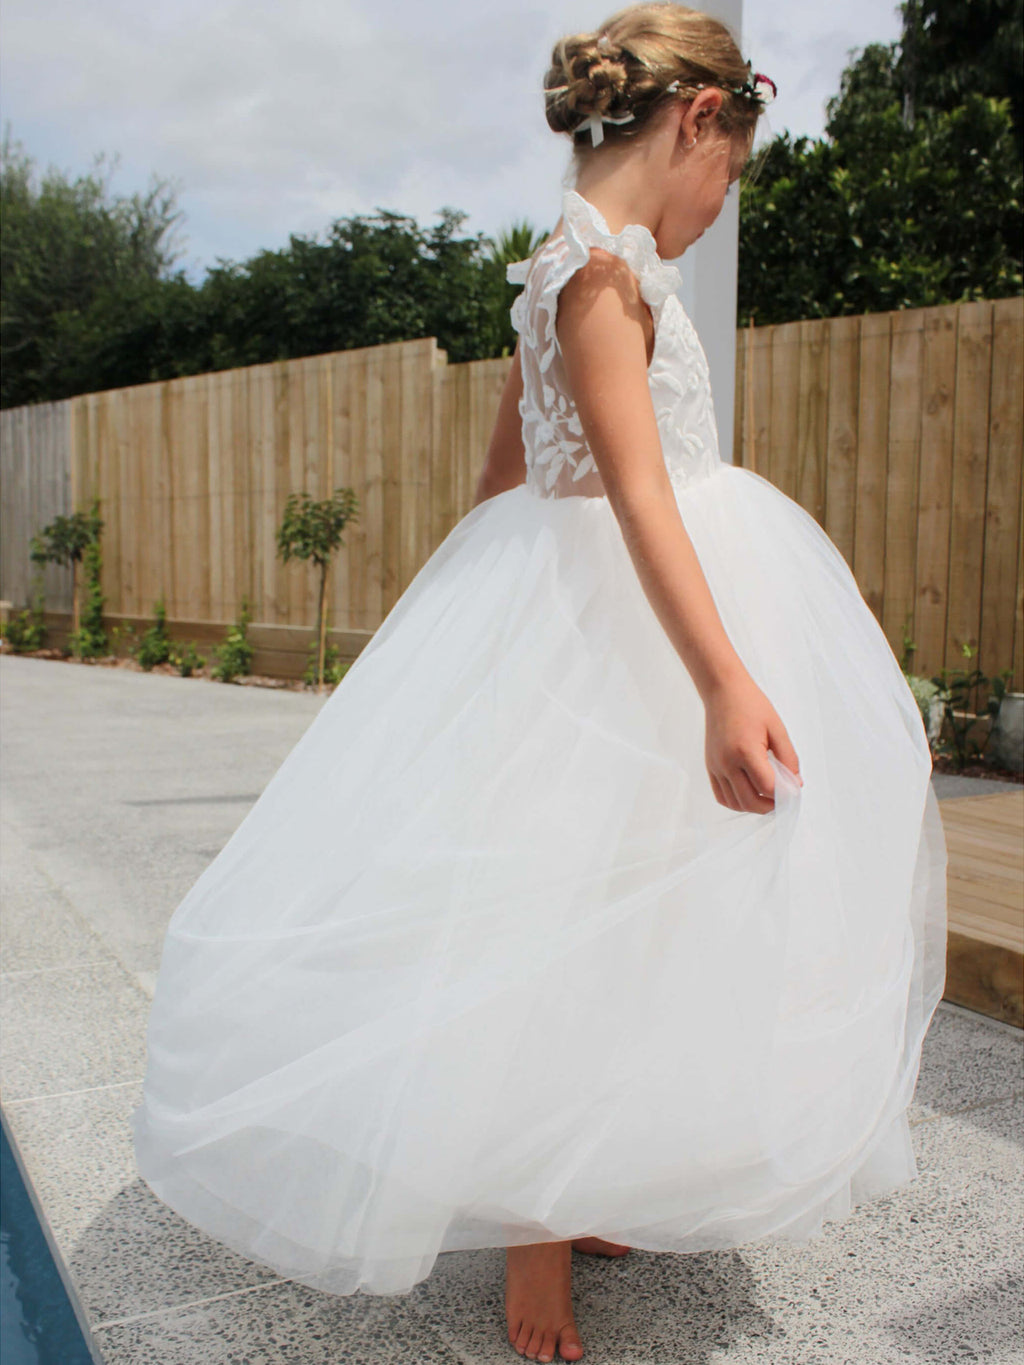 Abigail flower girl dress worn by a young girl. Showing feature lace back and full length tulle skirt.